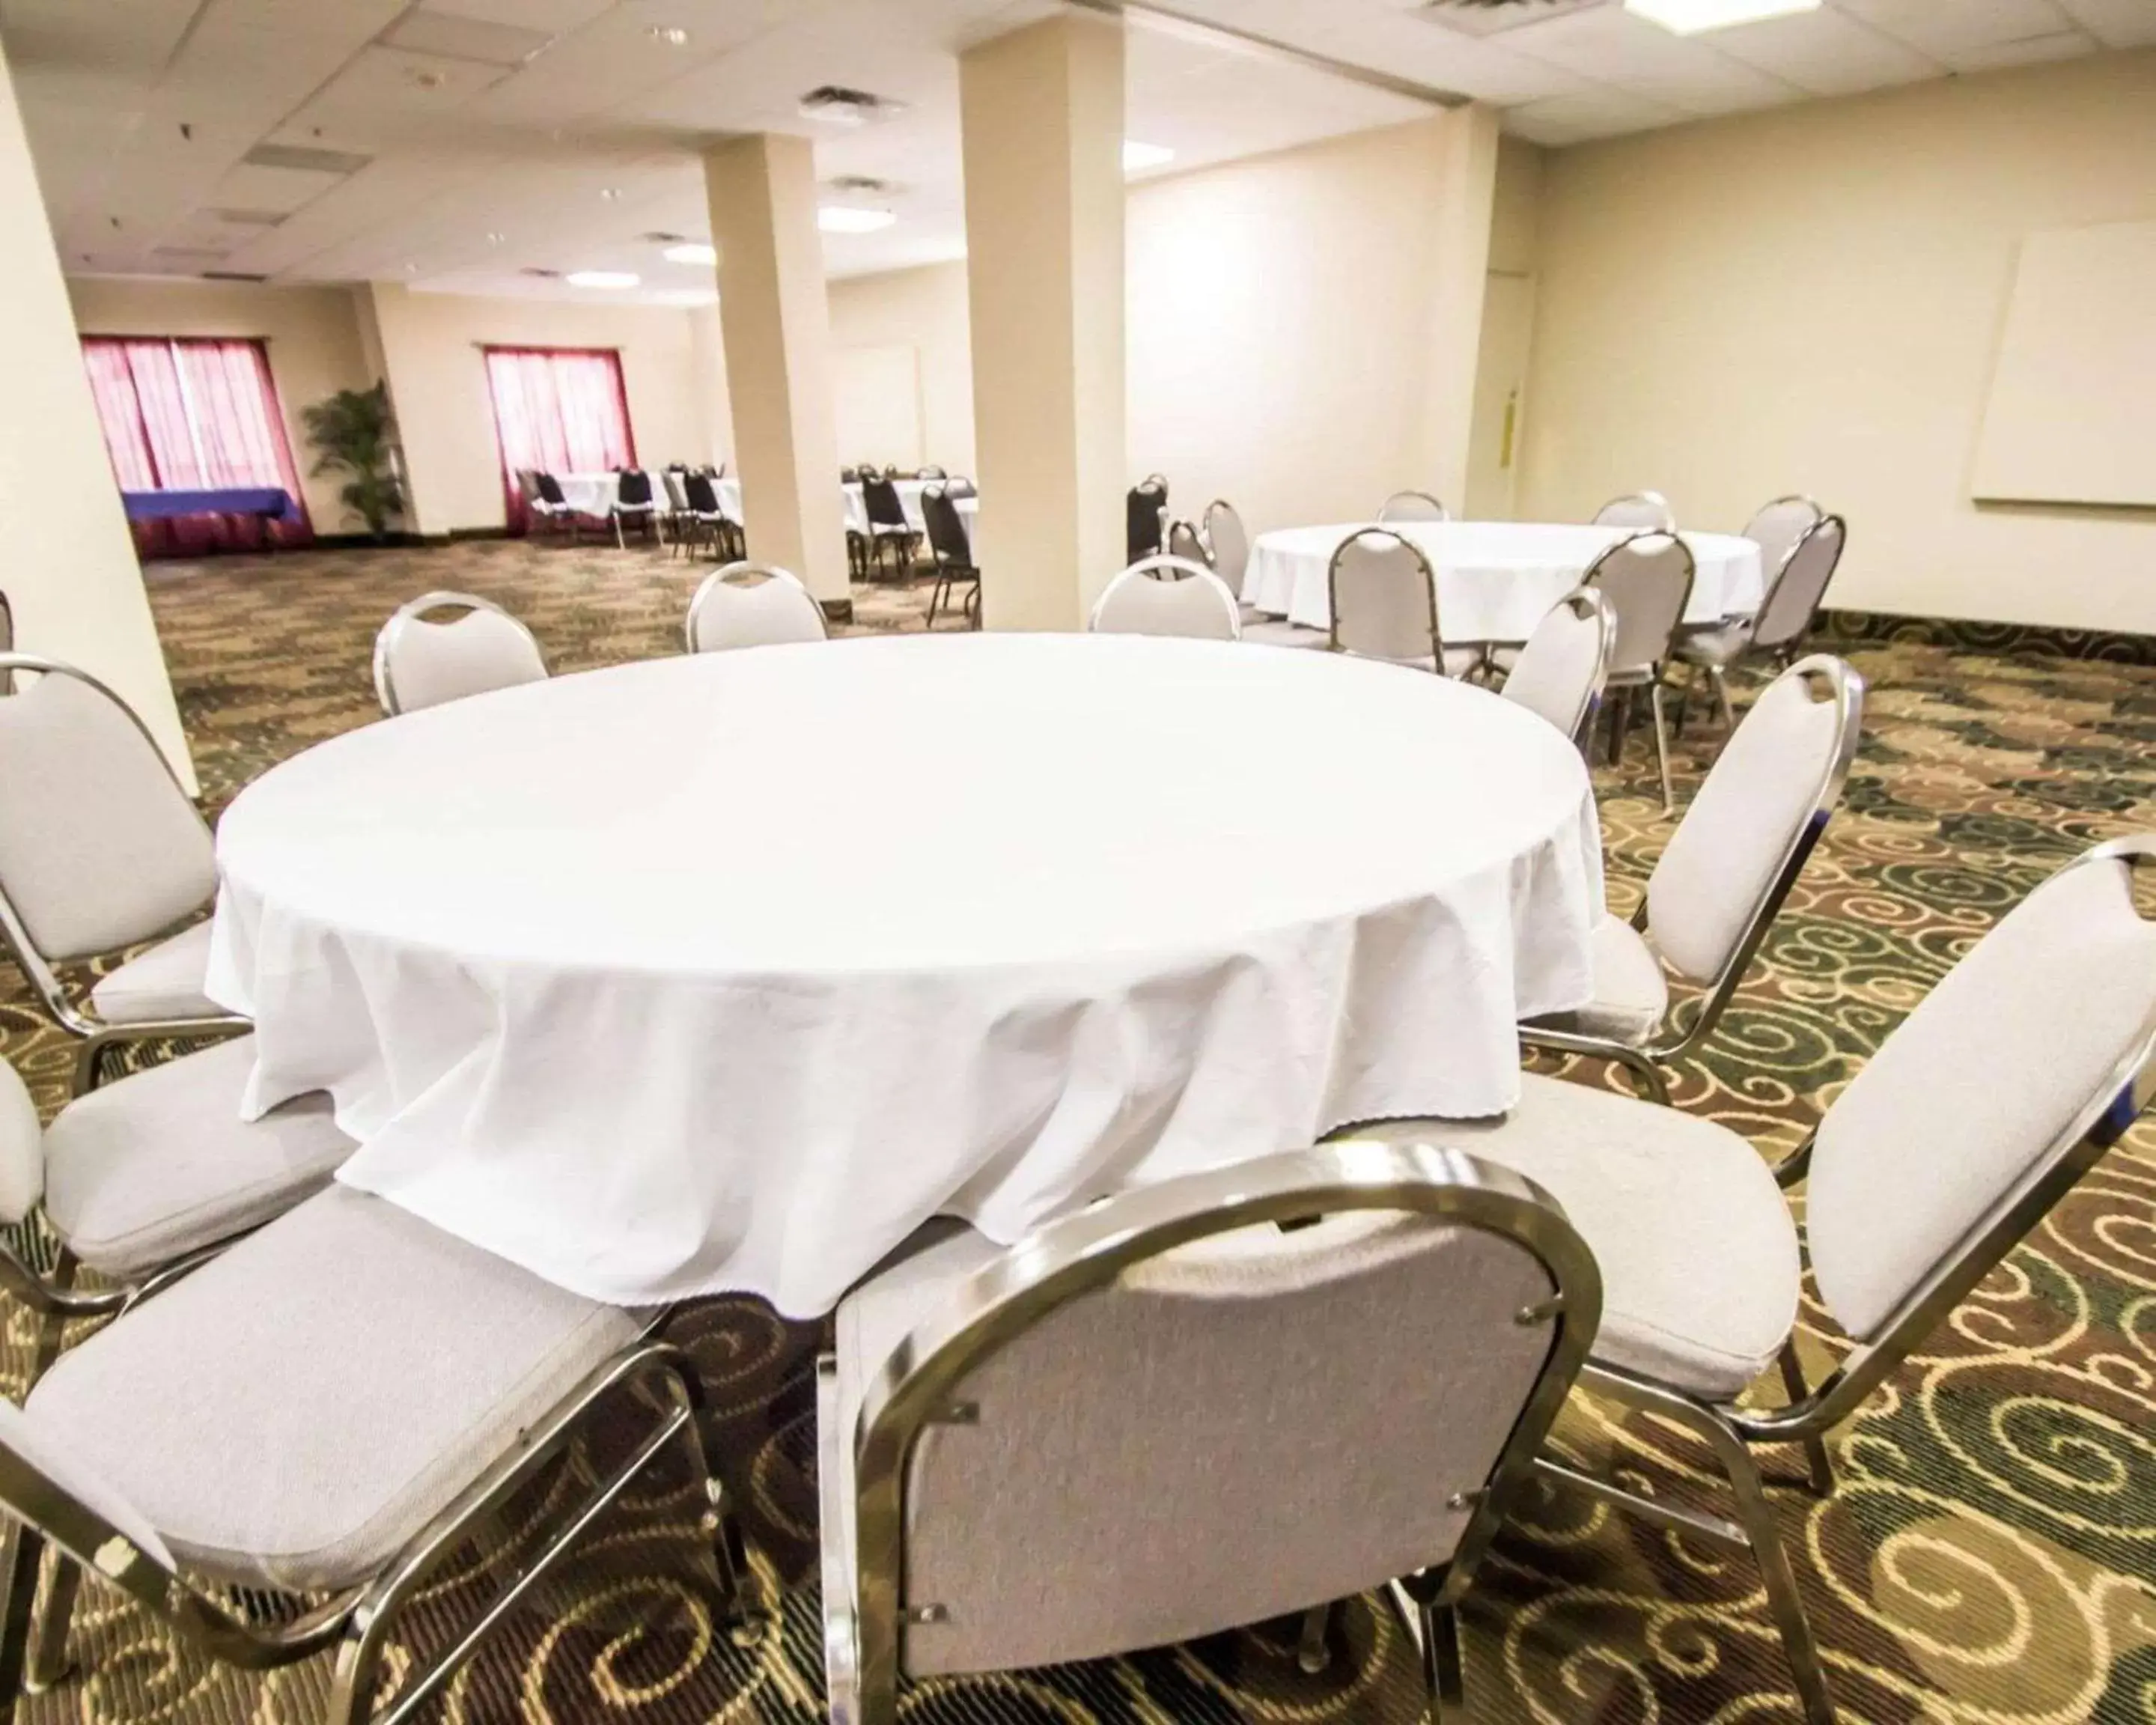 On site, Banquet Facilities in Quality Inn & Suites Orlando / Winter Park